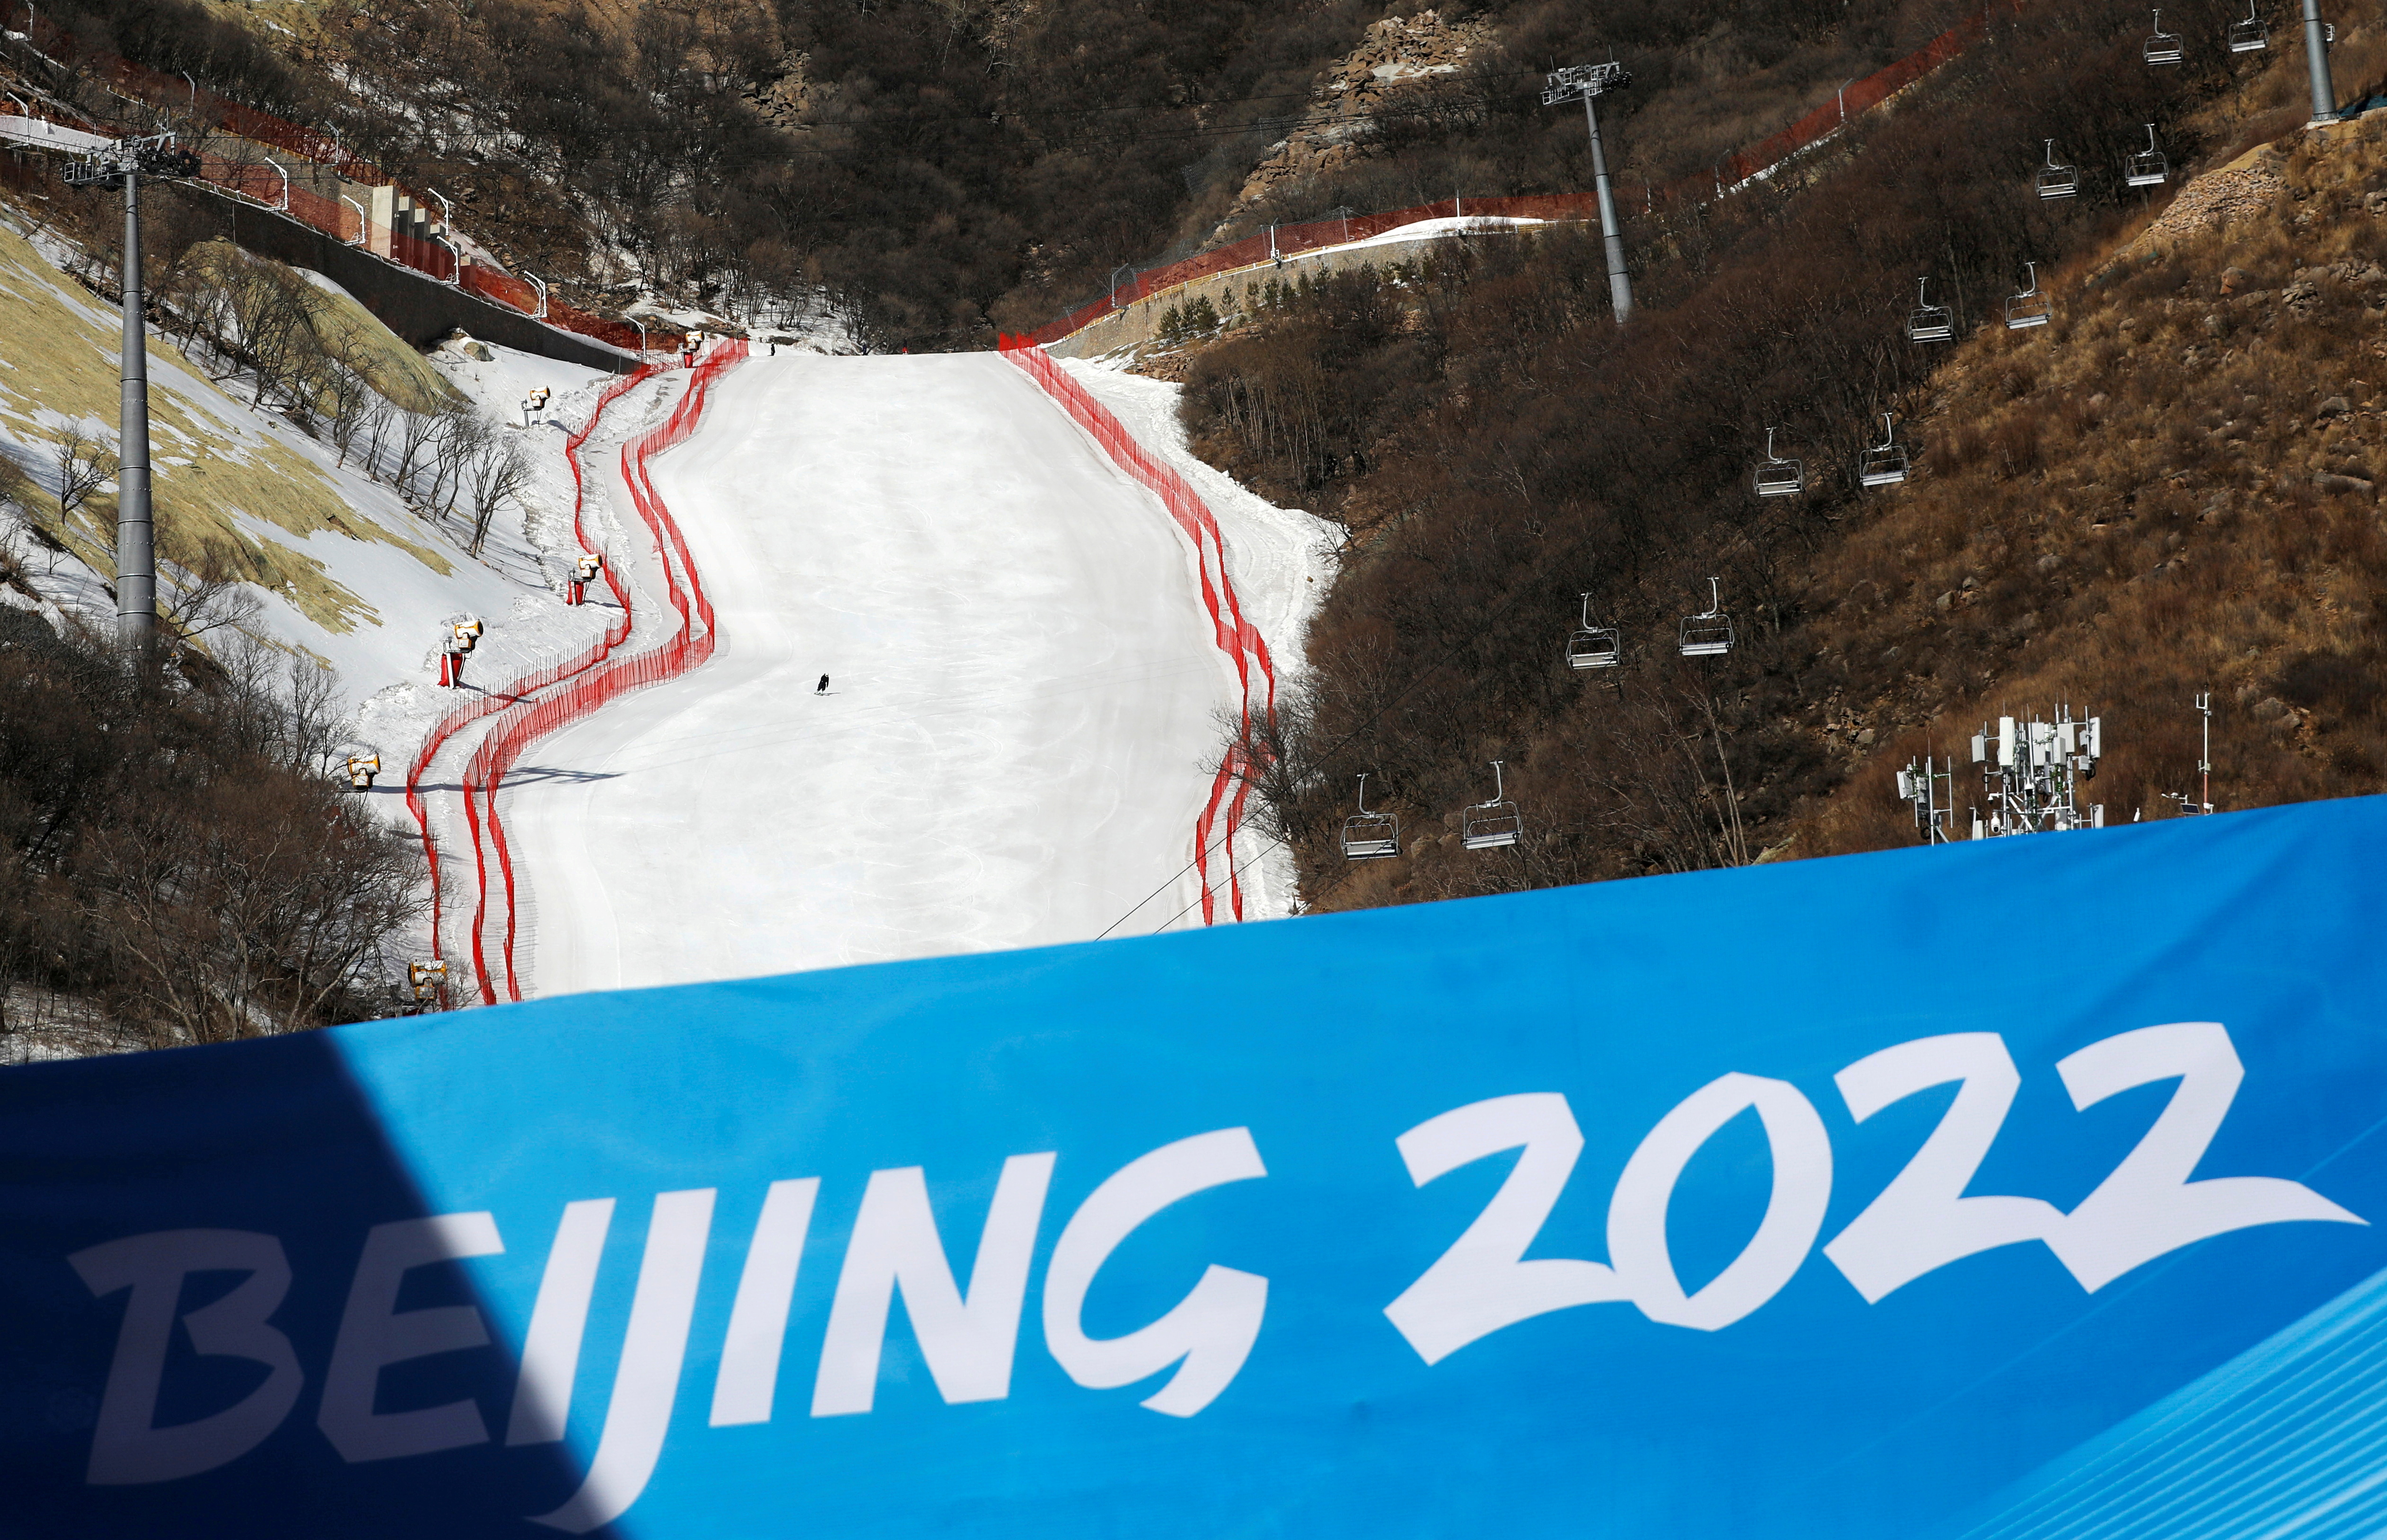 A staff member skis down a slope during an organised media tour to the National Alpine Skiing Centre, a venue of the 2022 Winter Olympic Games, in Beijing's Yanqing district, China February 5, 2021. REUTERS/Tingshu Wang/File Photo